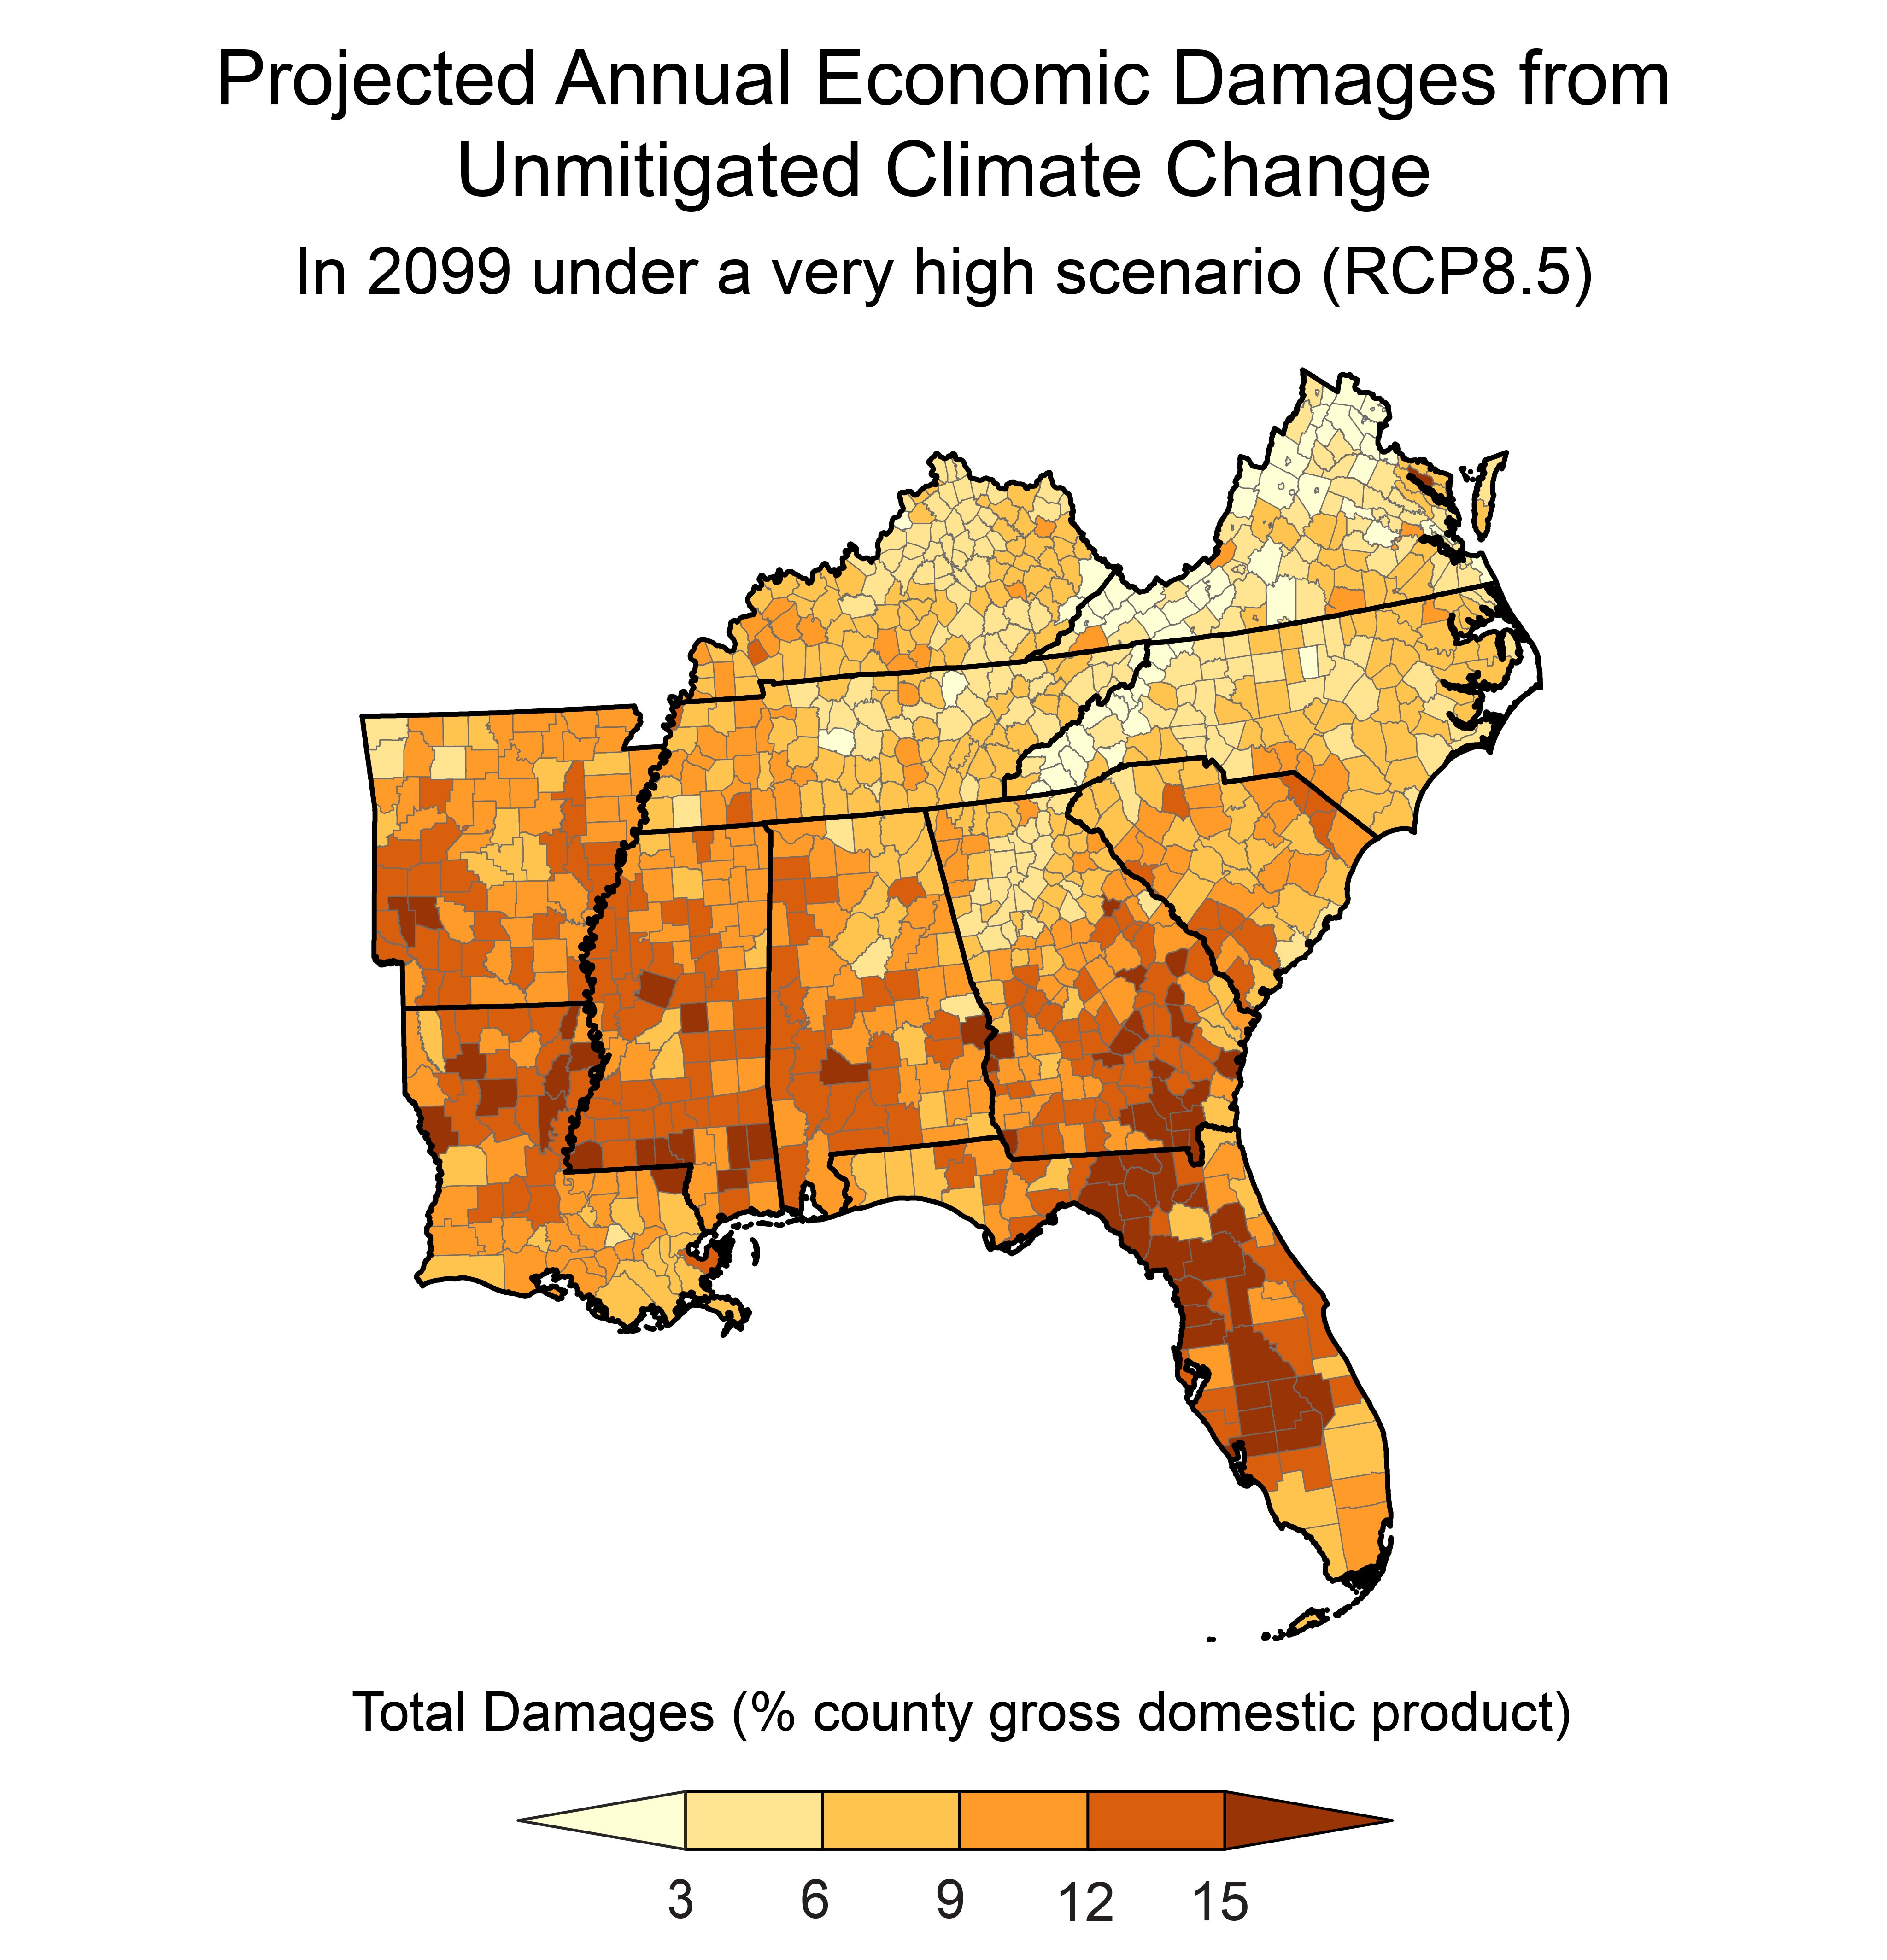 Projected Annual Economic Damages from Unmitigated Climate Change